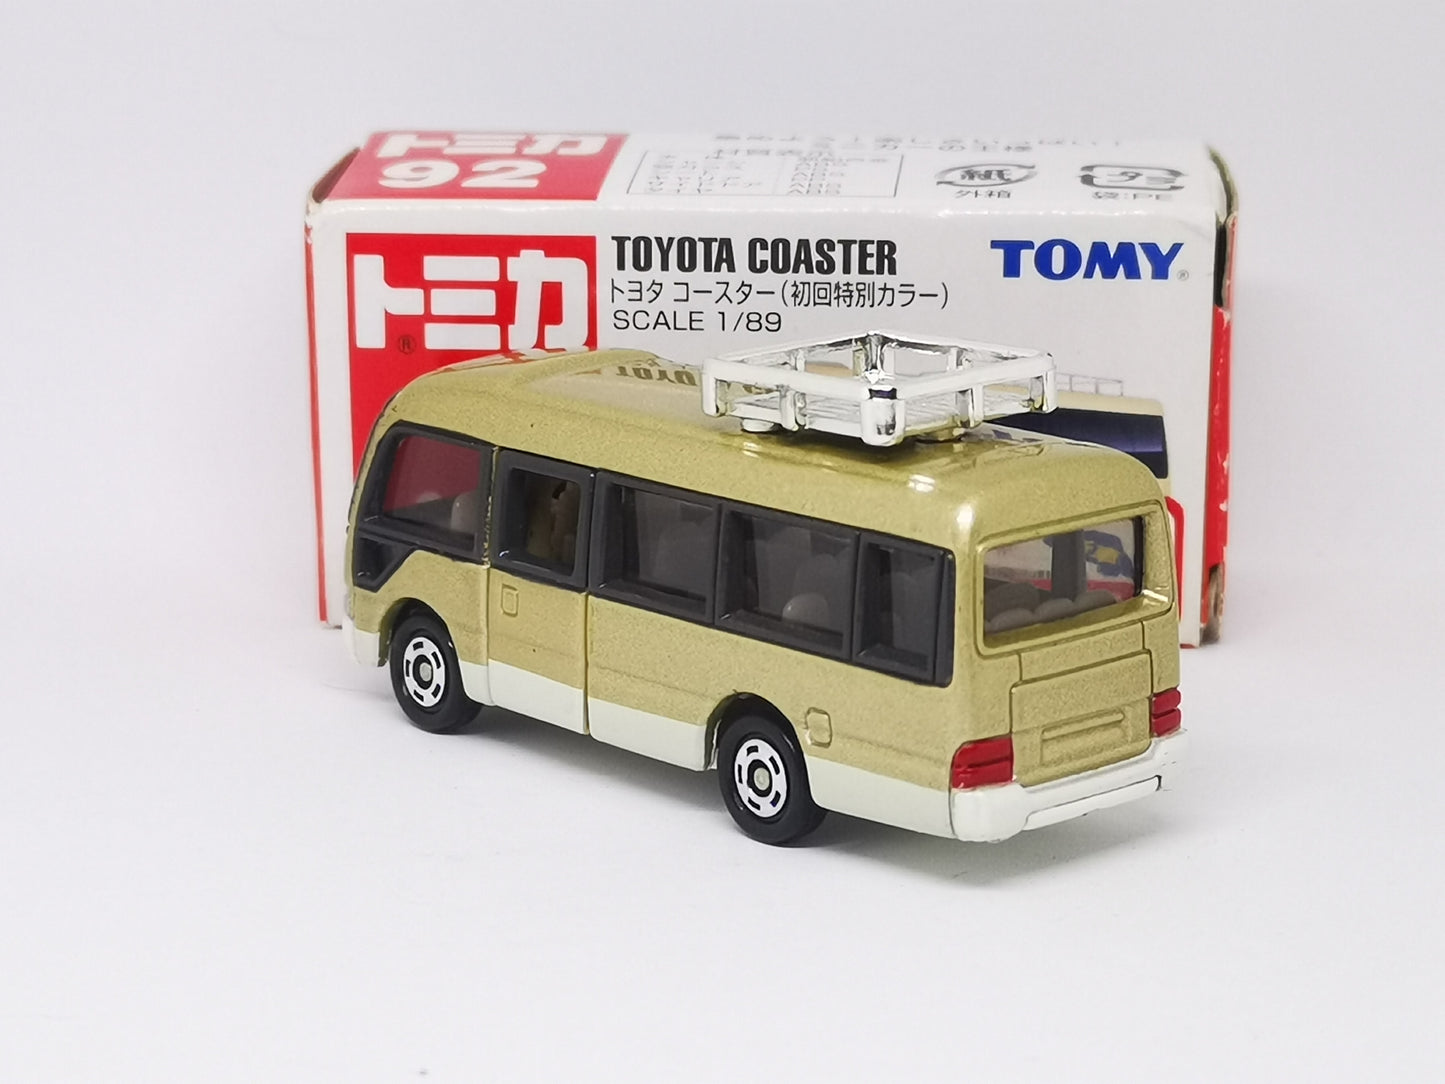 Tomica No.92 Toyota Coaster 1st edition